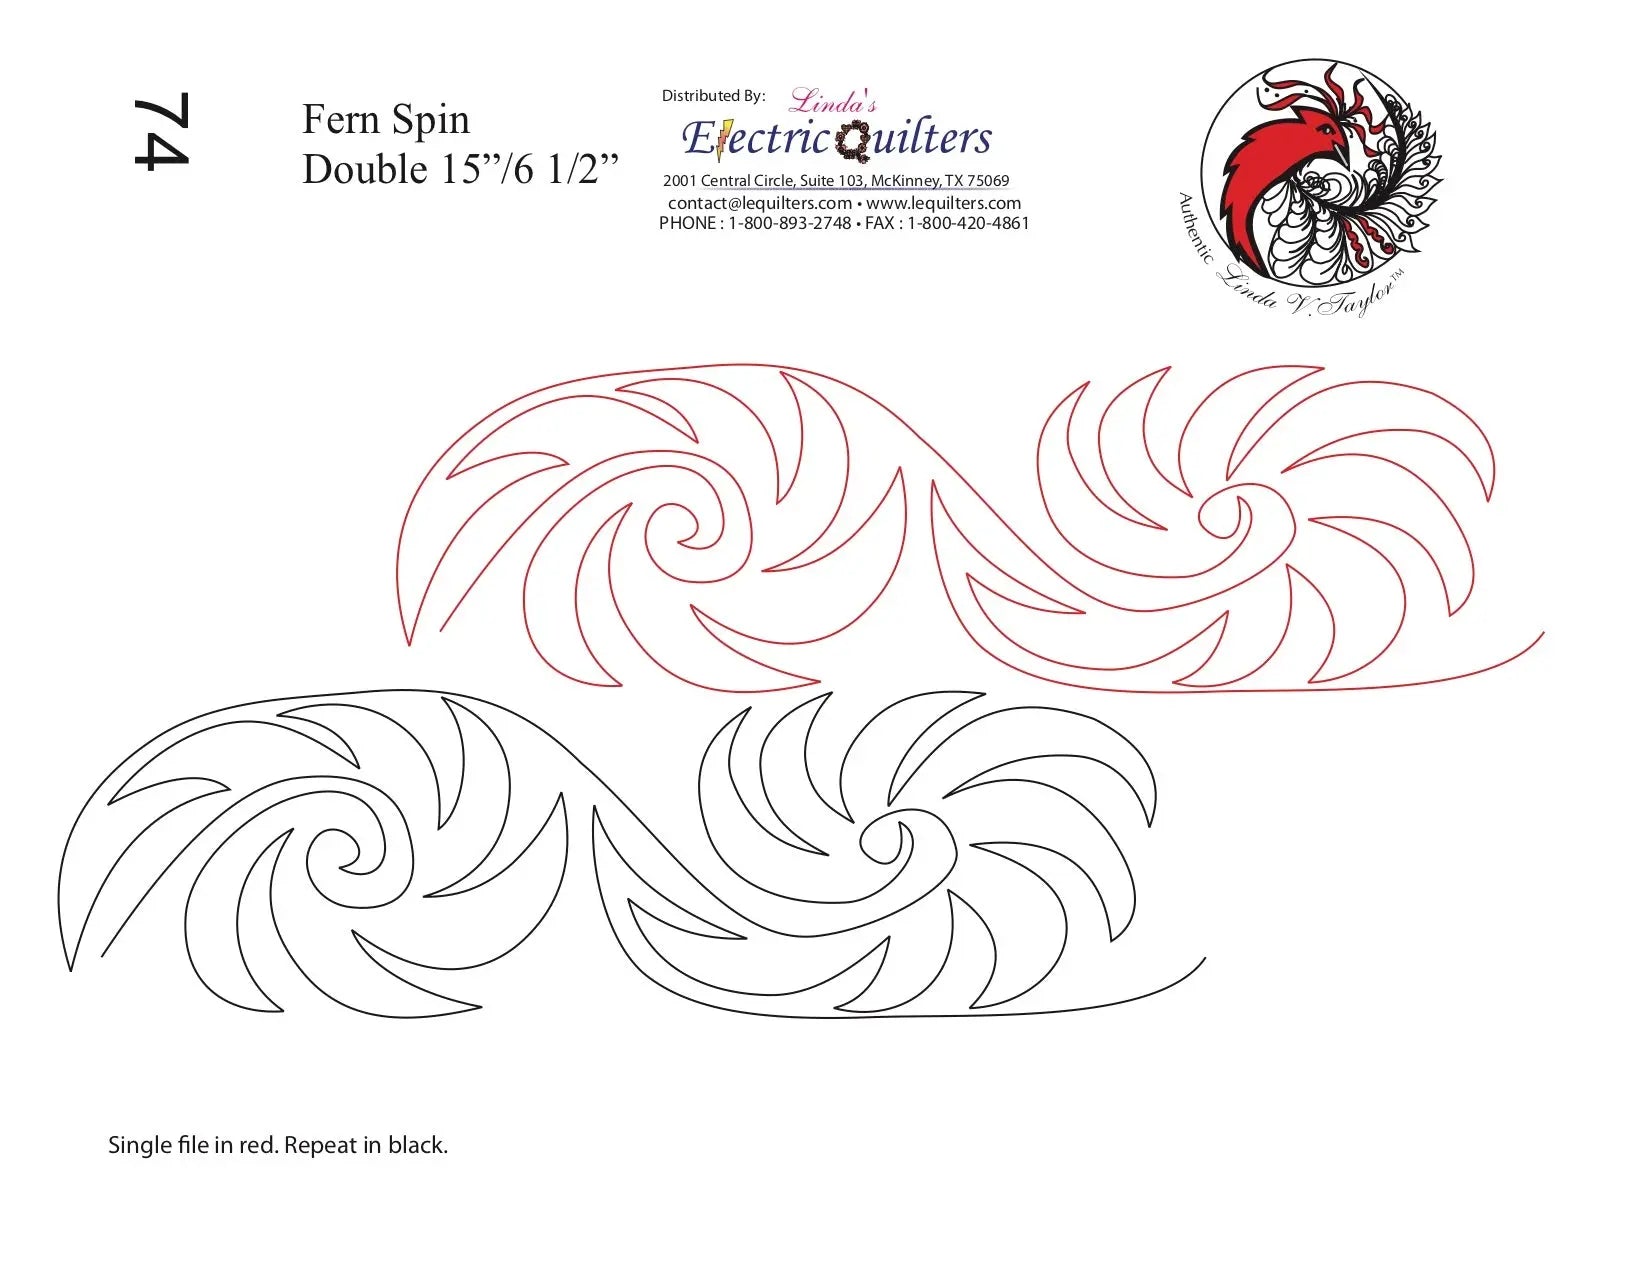 074 Fern Spin Pantograph by Linda V. Taylor - Linda's Electric Quilters